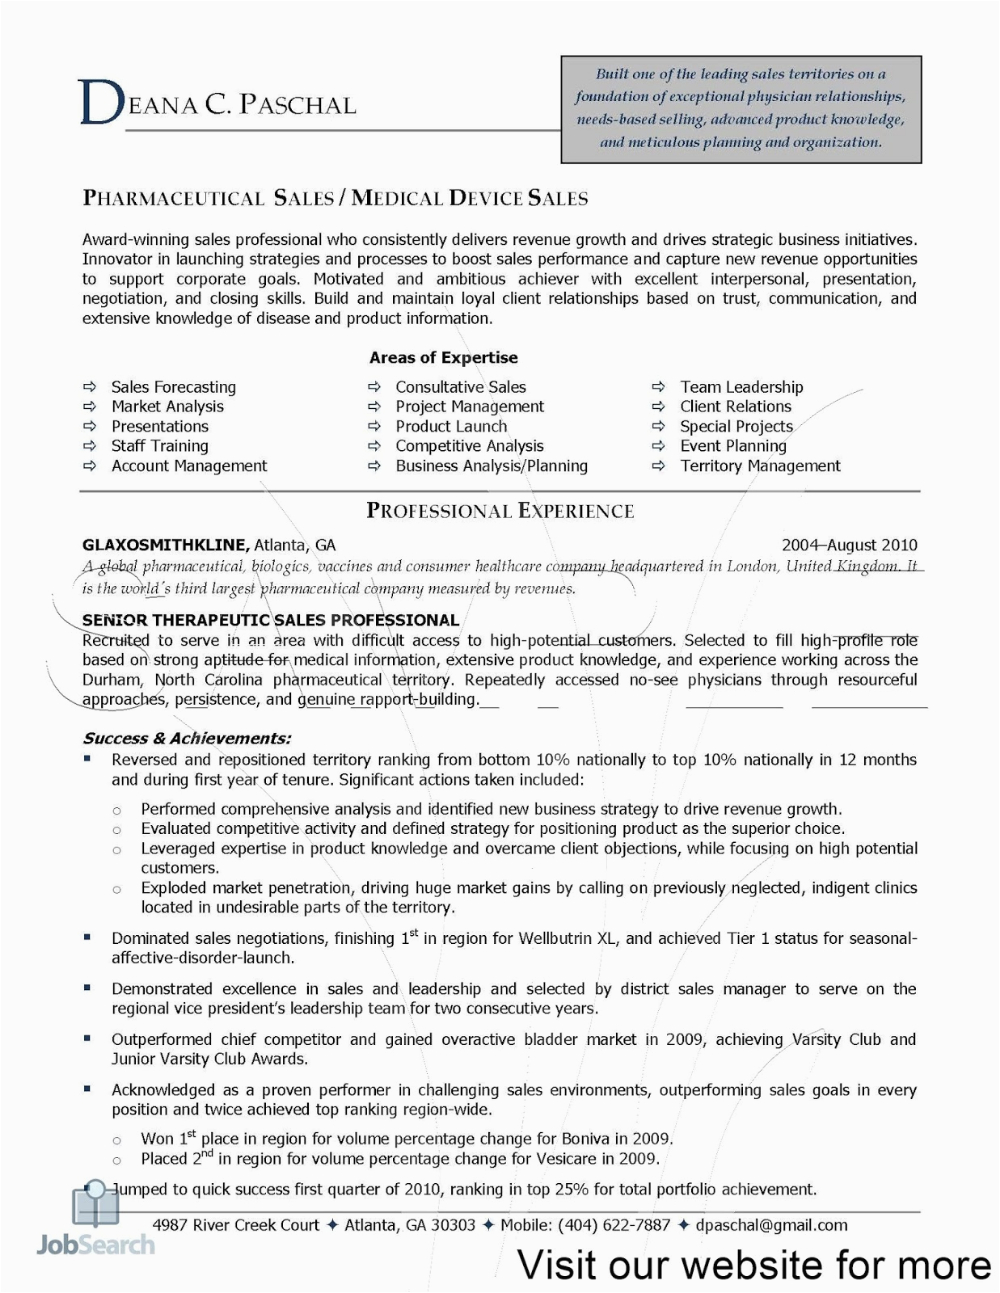 Sample Resume for Pharmaceutical Sales Entry Level 33 Entry Level Pharmaceutical Sales Resume Sample for Your School Lesson